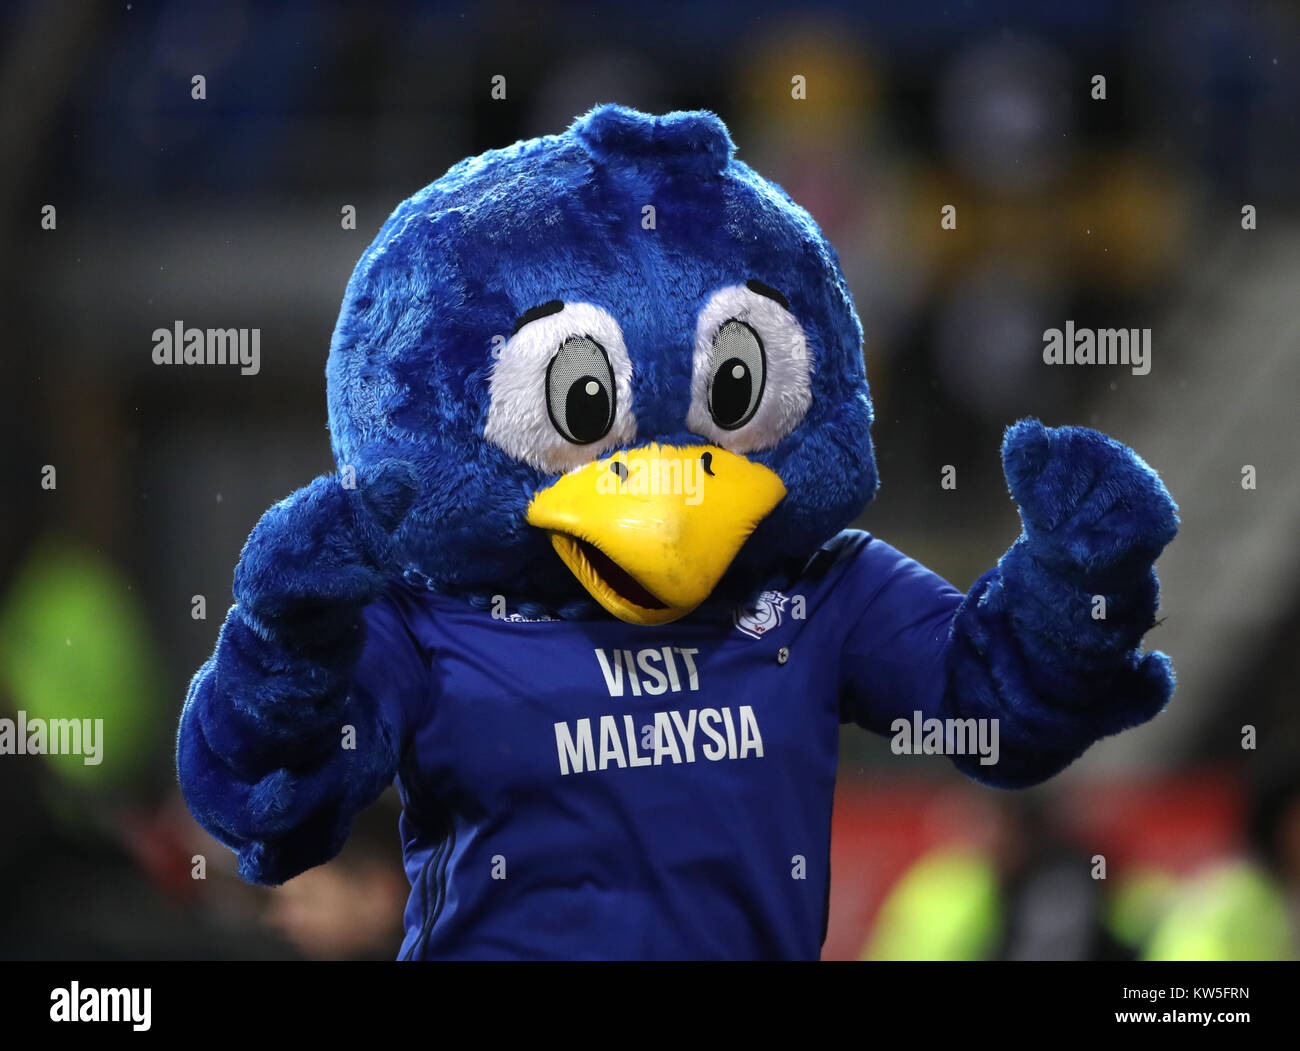 Cardiff City mascot Bartley Blue during the Sky Bet Championship match at The Den, London. PRESS ASSOCIATION Photo. Picture date: Friday December 29, 2017. See PA story SOCCER Cardiff. Photo credit should read: Nick Potts/PA Wire. RESTRICTIONS: No use with unauthorised audio, video, data, fixture lists, club/league logos or 'live' services. Online in-match use limited to 75 images, no video emulation. No use in betting, games or single club/league/player publications. Stock Photo